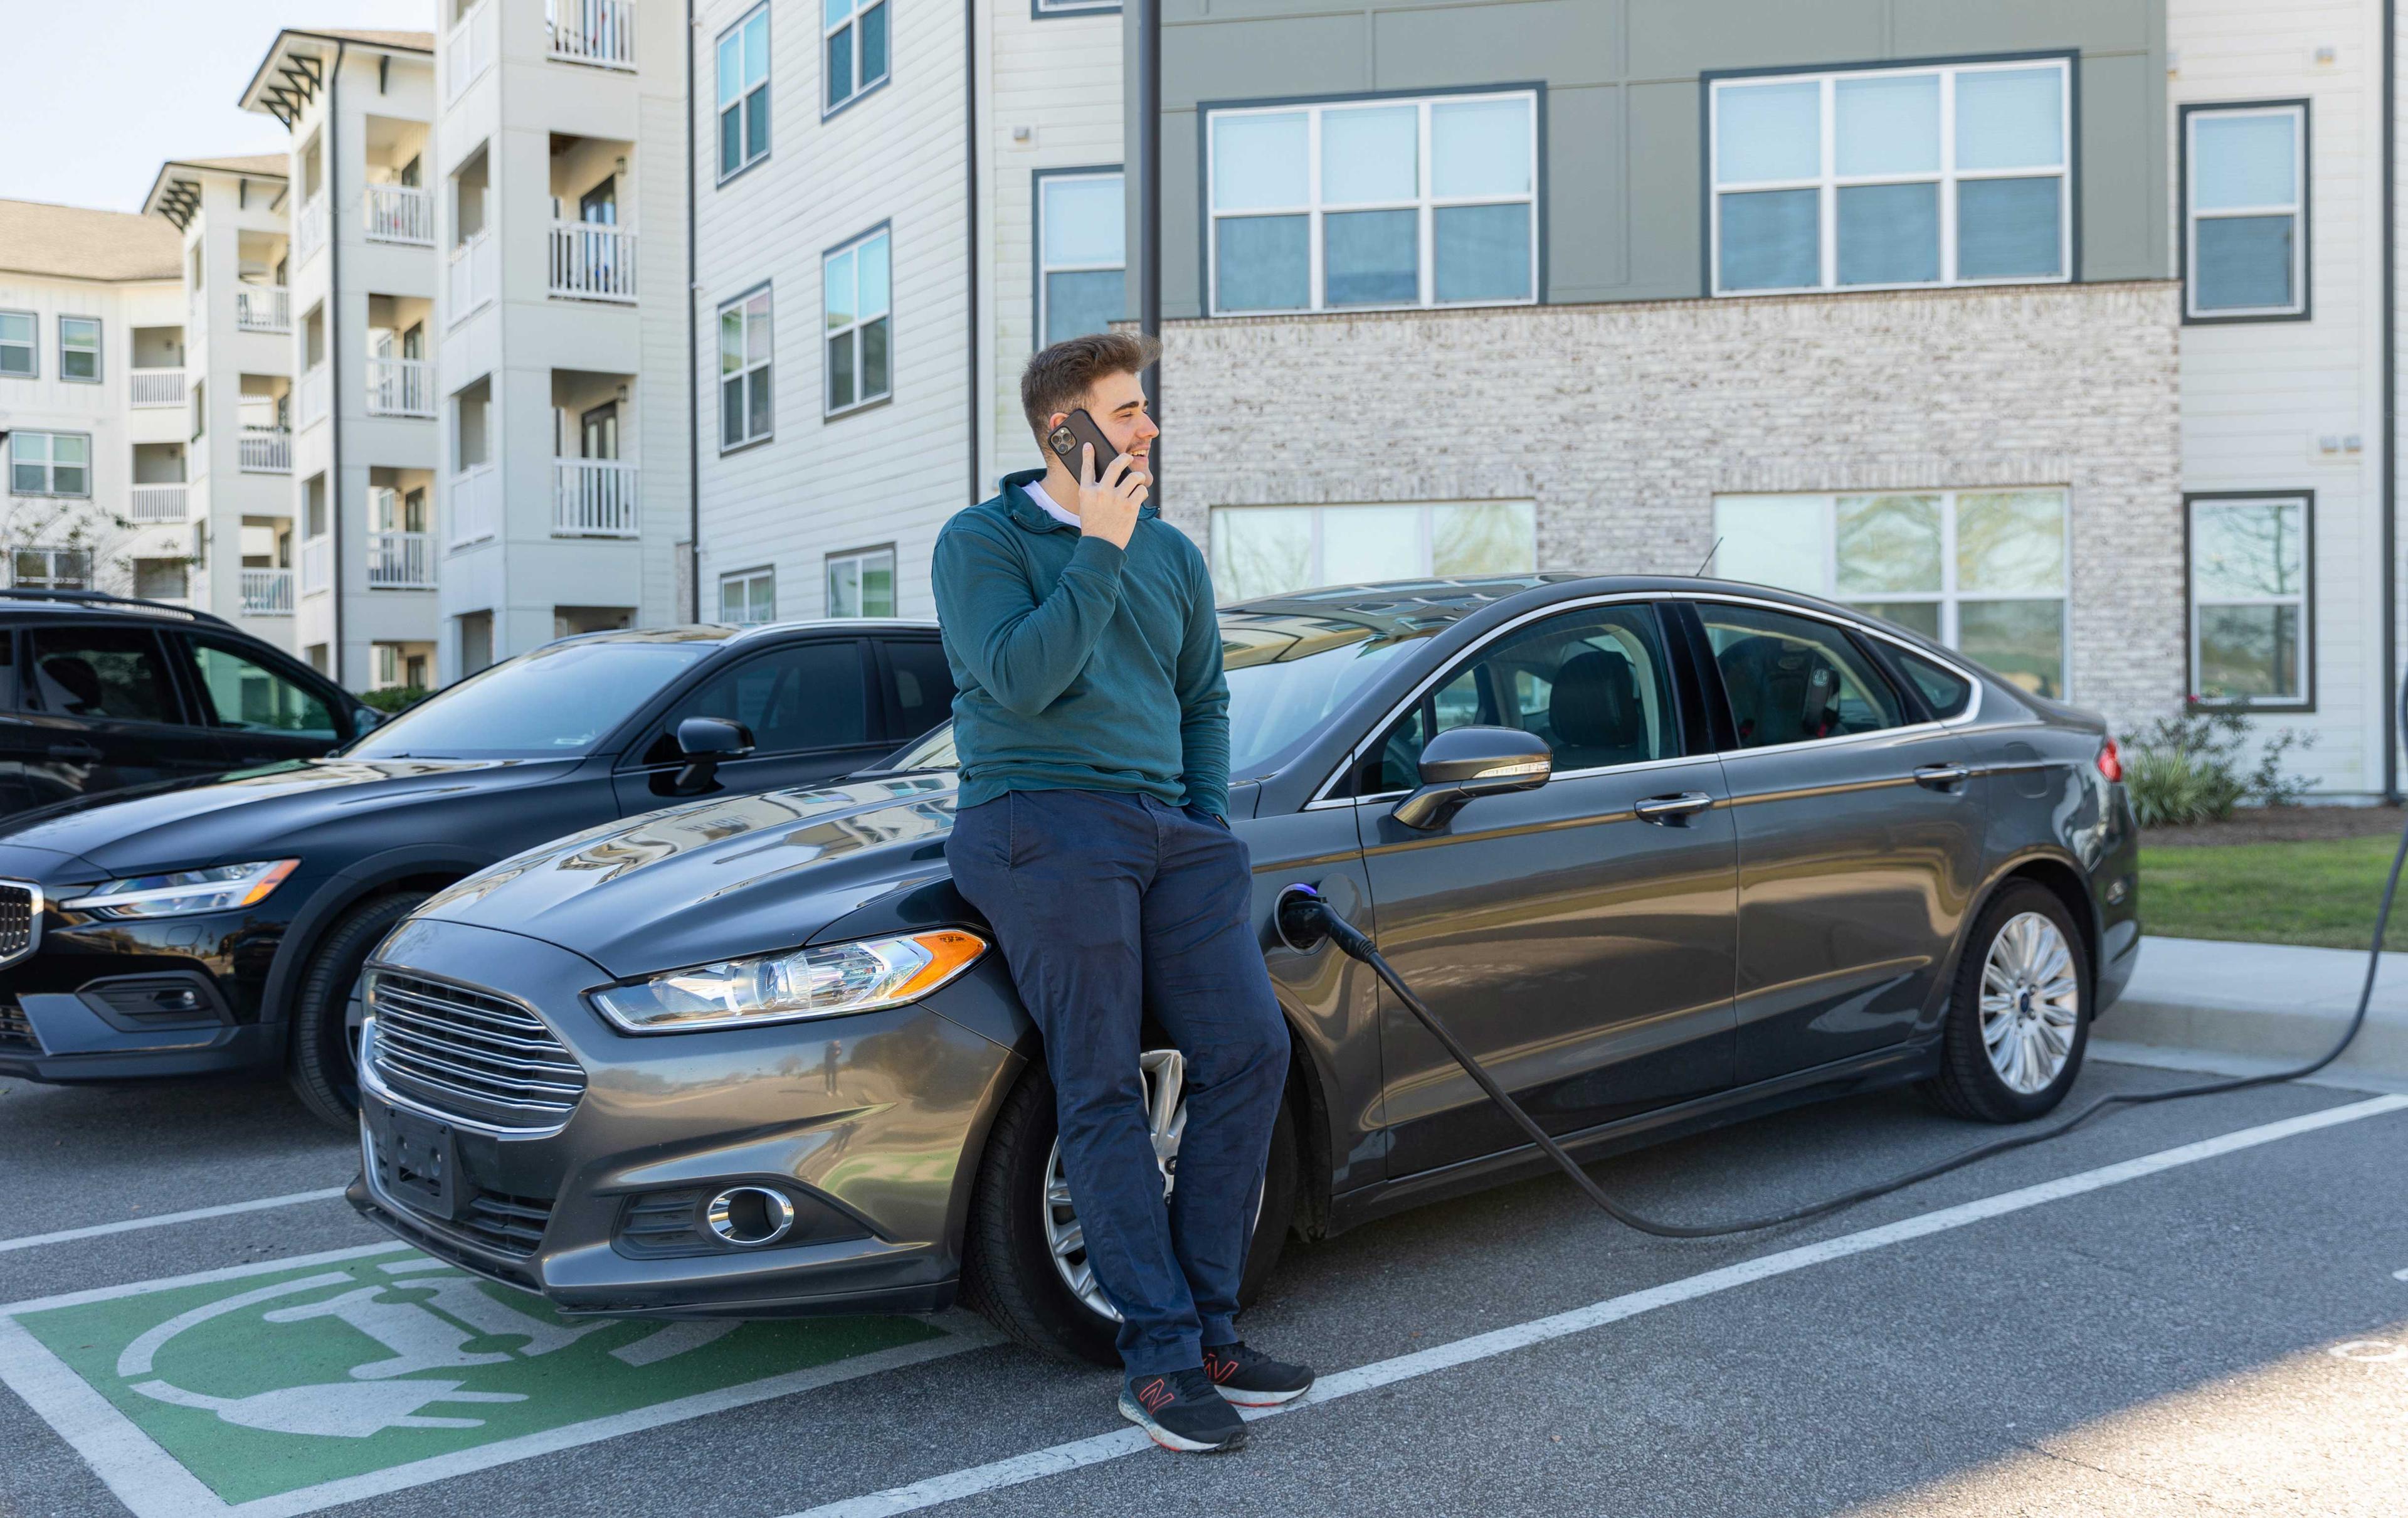 Your Guide to EV Driver Etiquette in Multifamily Communities